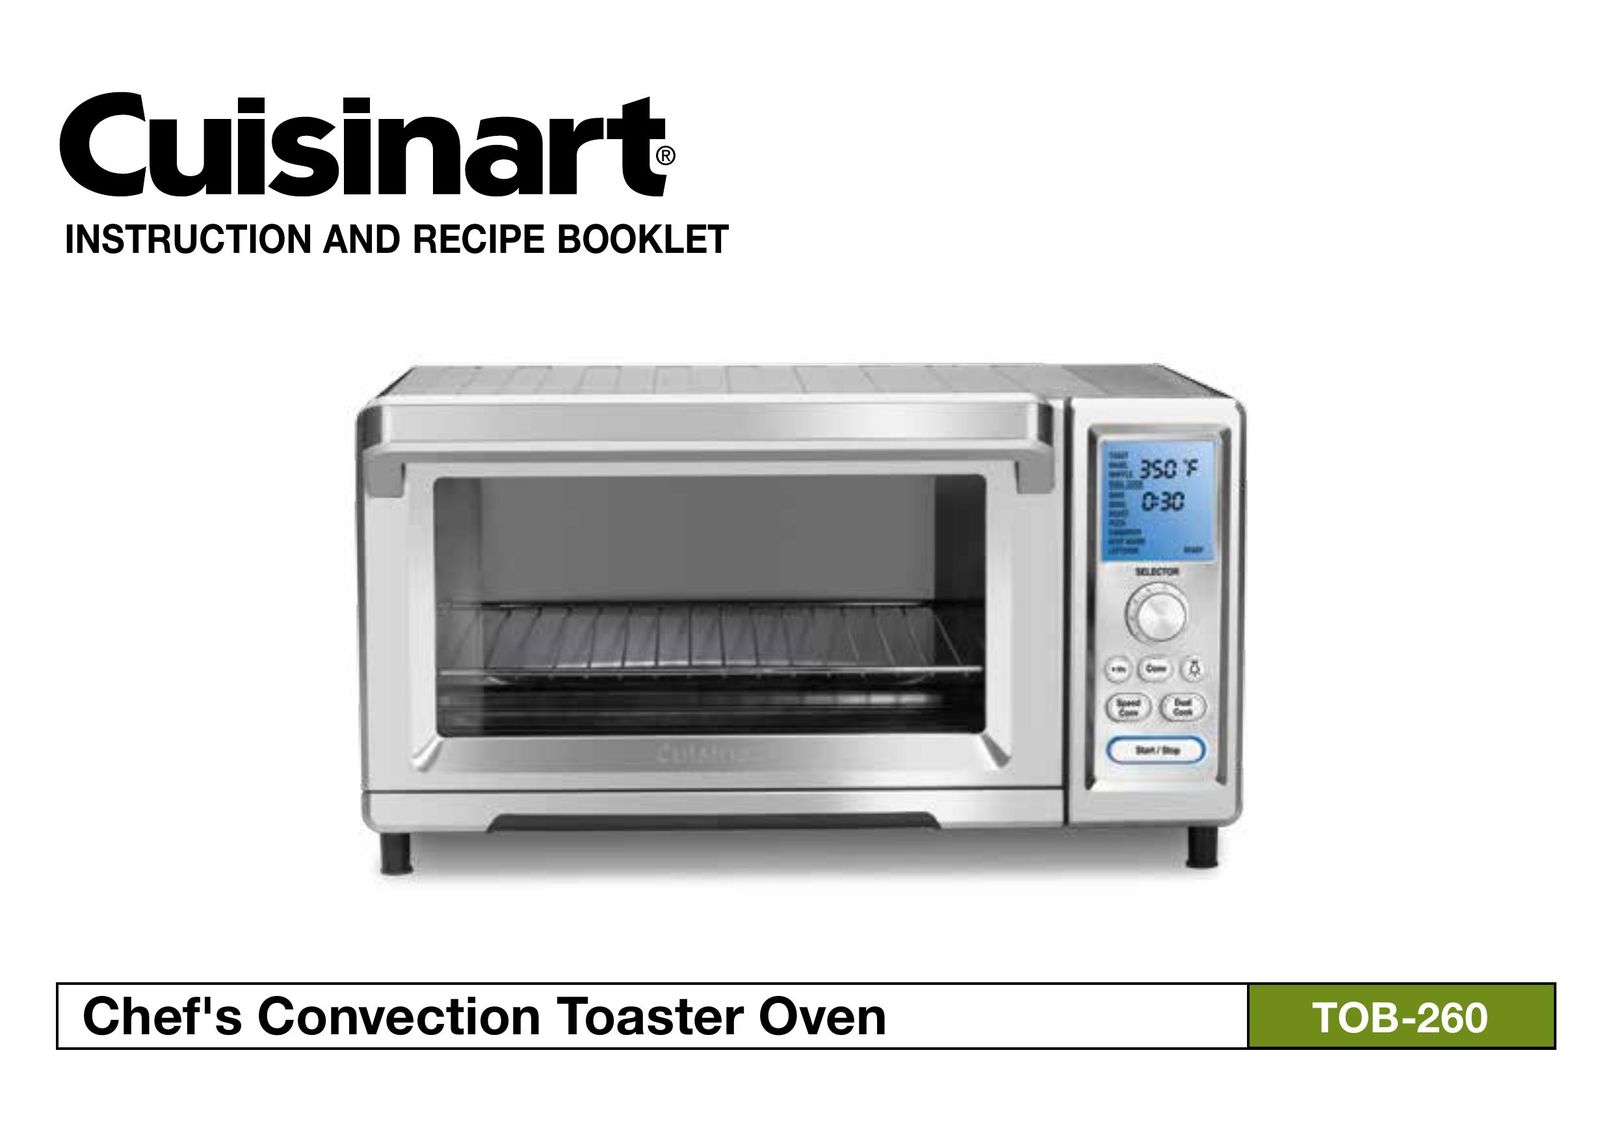 Cuisinart Chef's Convection Toaster Oven Convection Oven User Manual